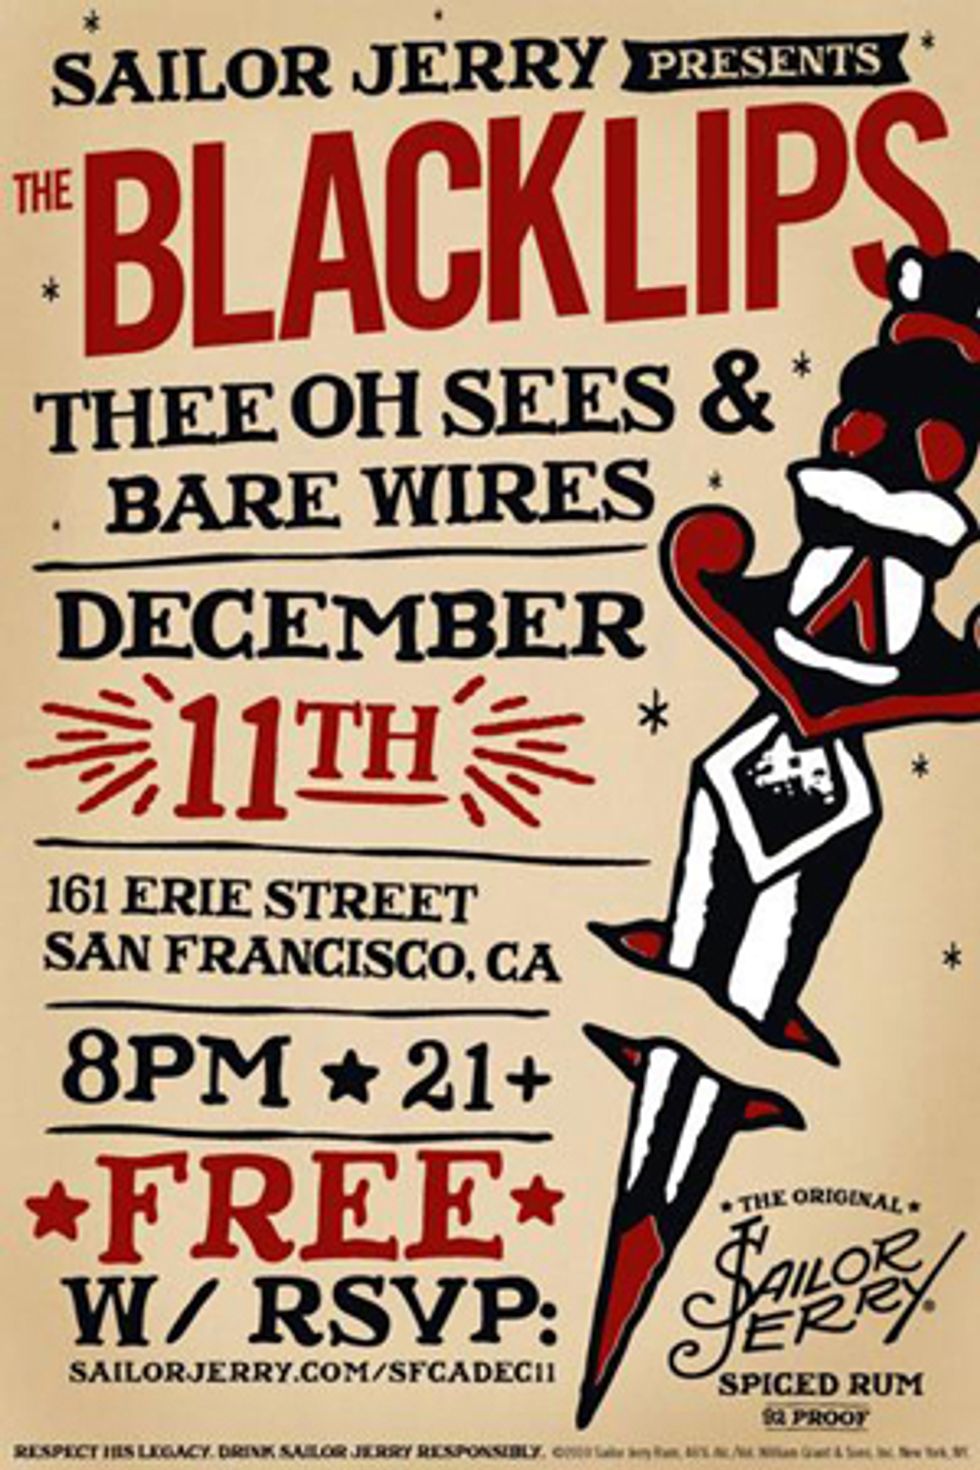 Free Black Lips, Thee Oh Sees & Bare Wire Show @ Public Works December 11